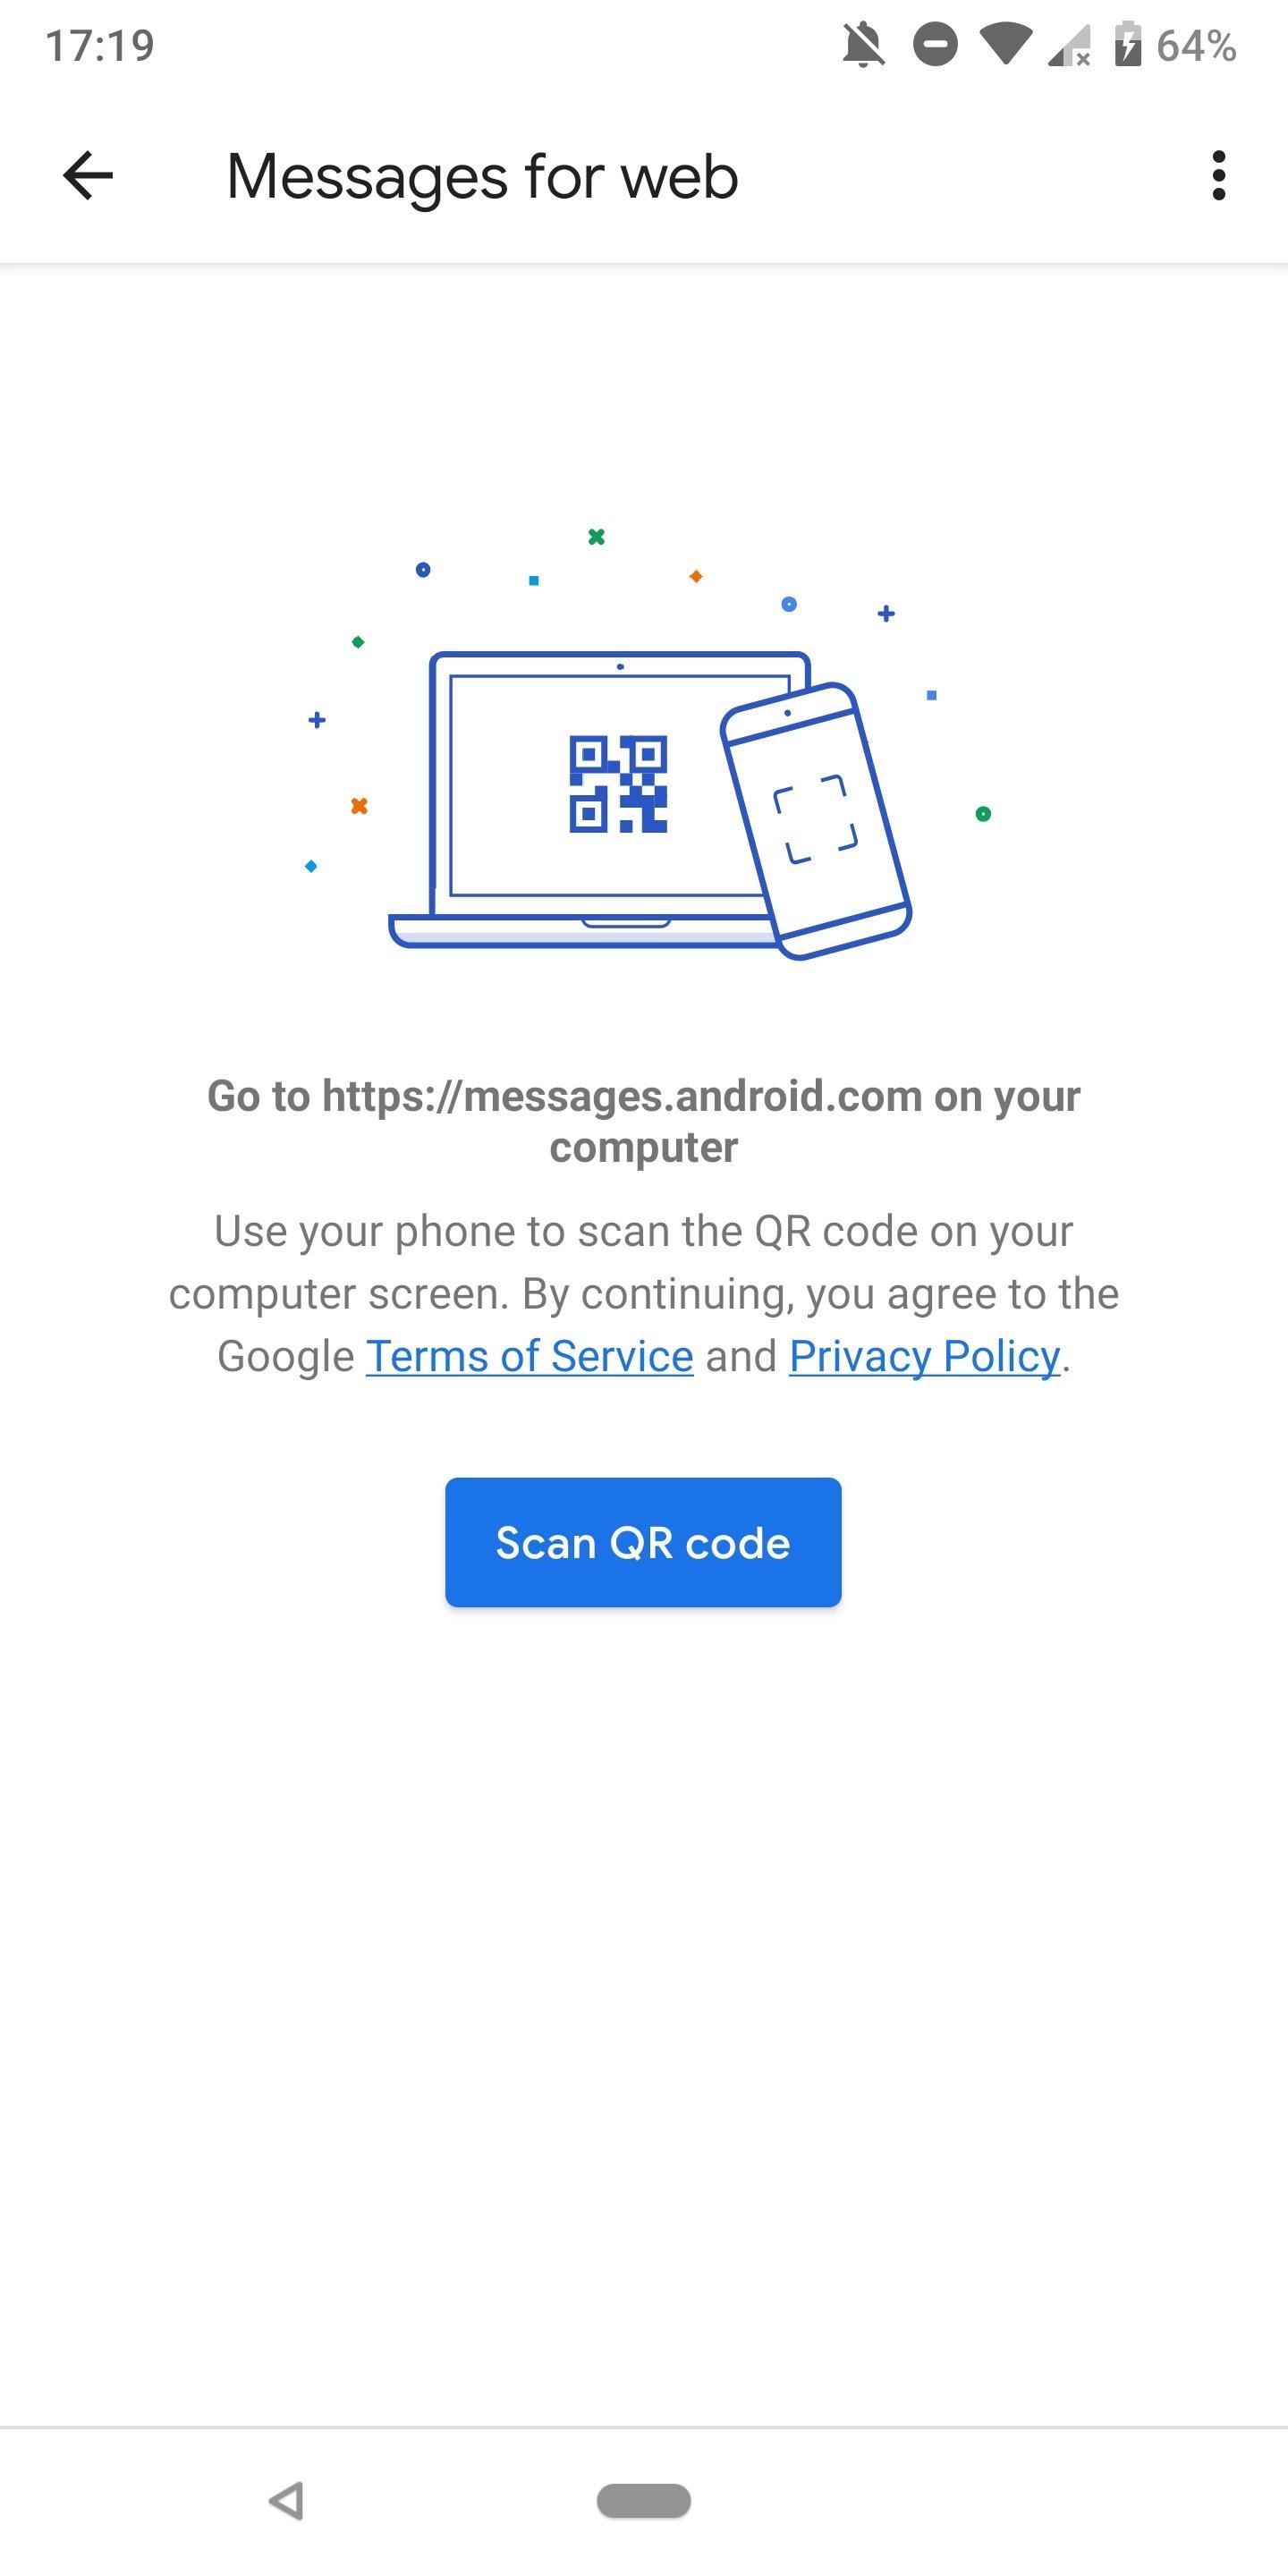 Send & Receive Texts from Any Computer with Android Messages